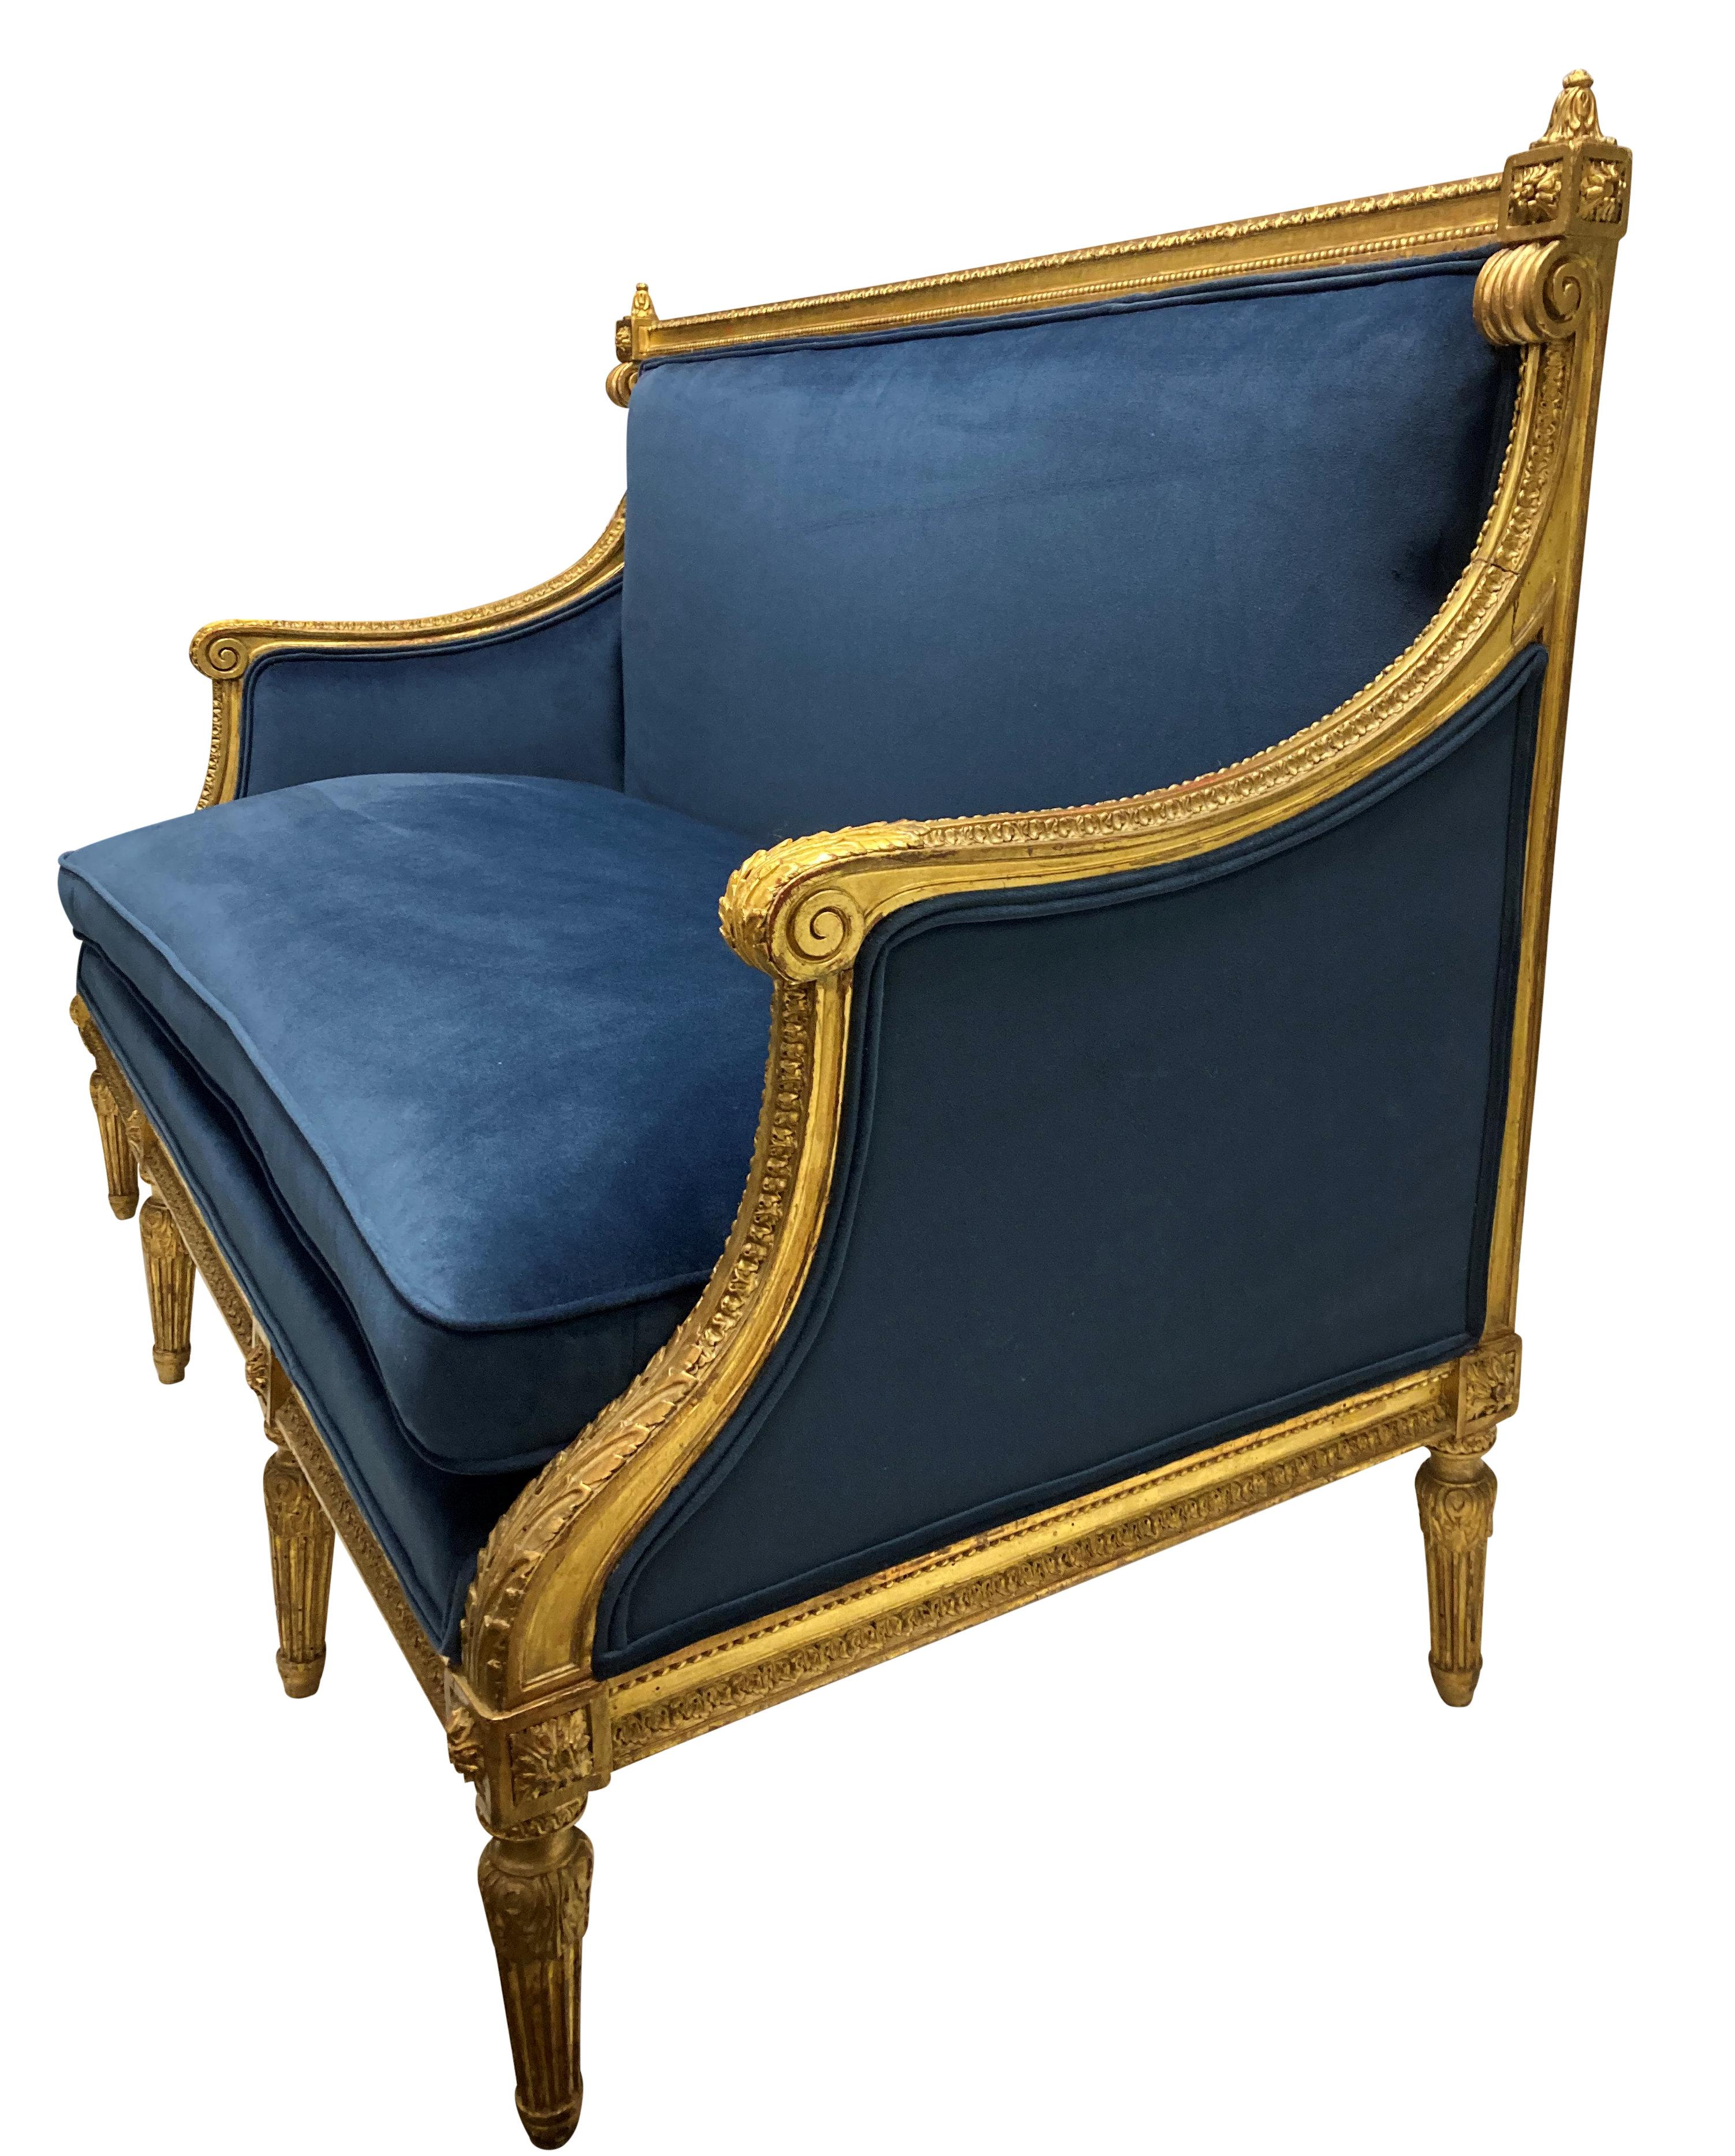 French Louis XVI Style Giltwood Settee In Blue Velvet In Good Condition For Sale In London, GB